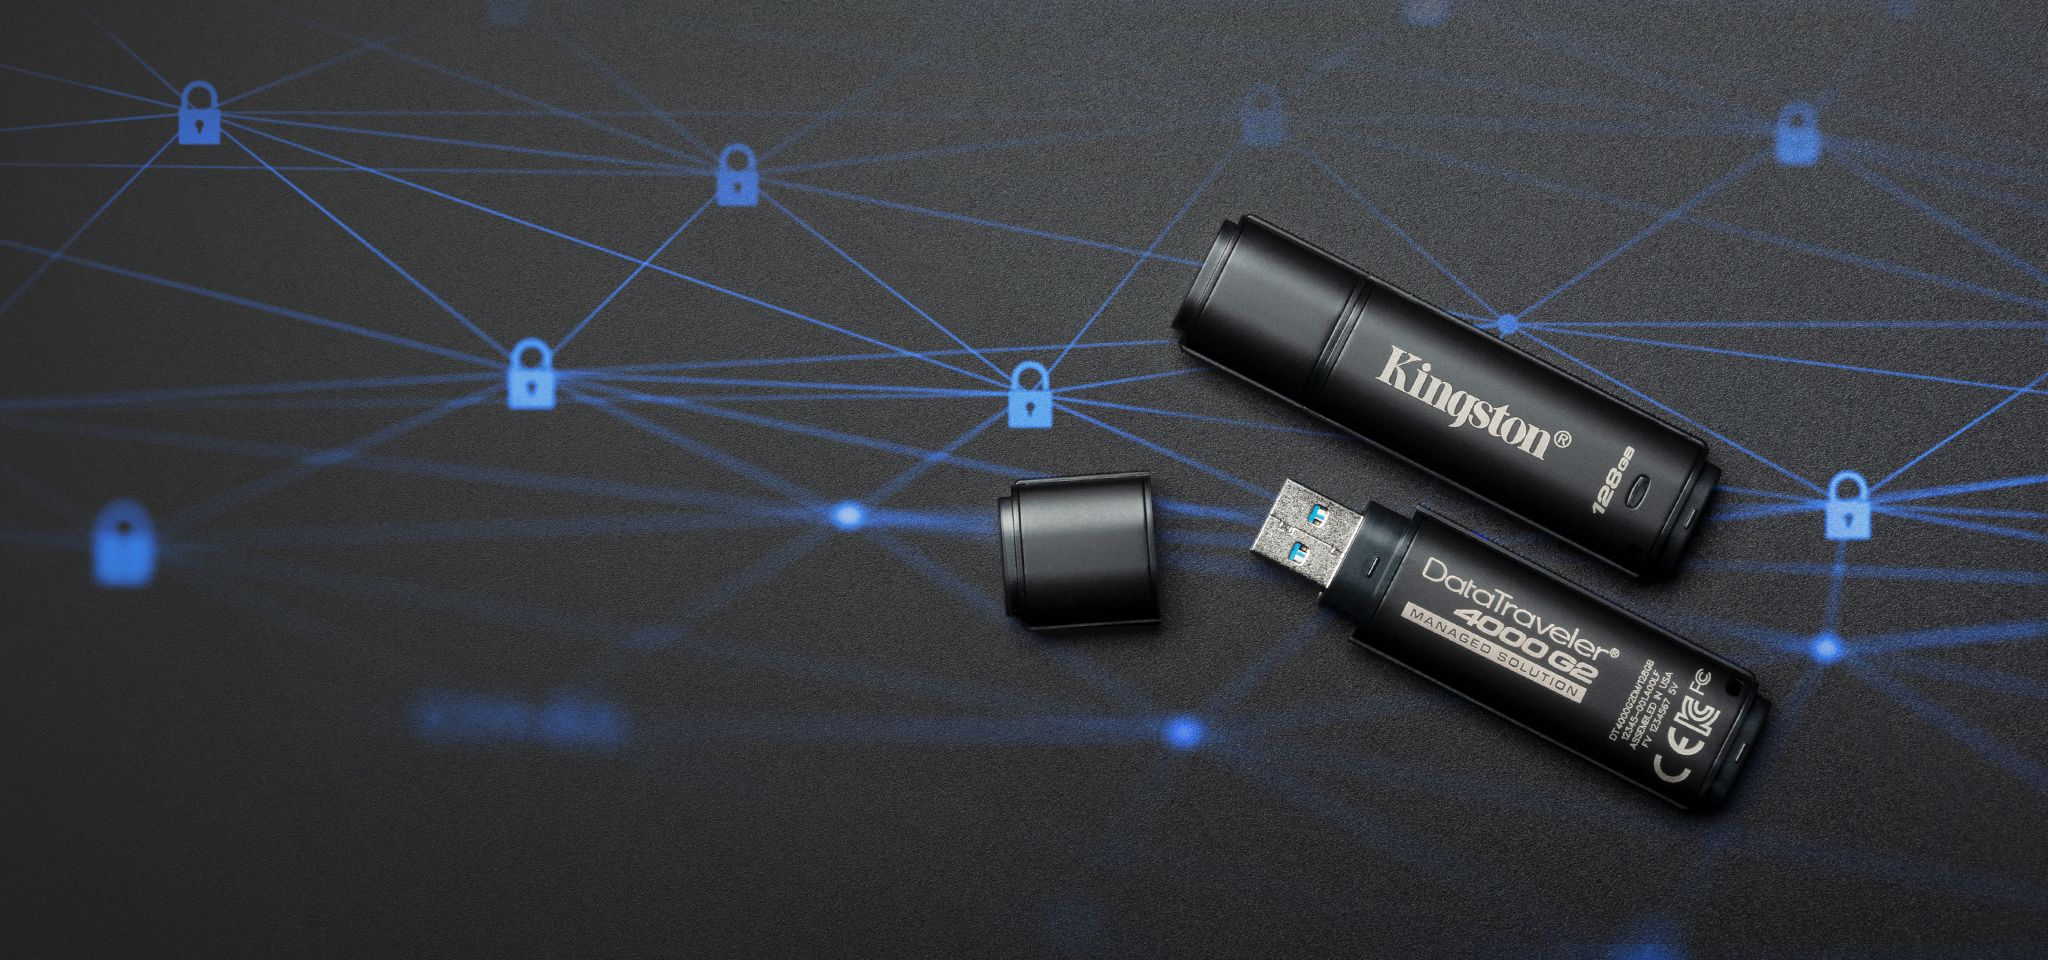 A pair of DT4000G2 USB flash drives sit on a black surface with lock icon graphics in blue